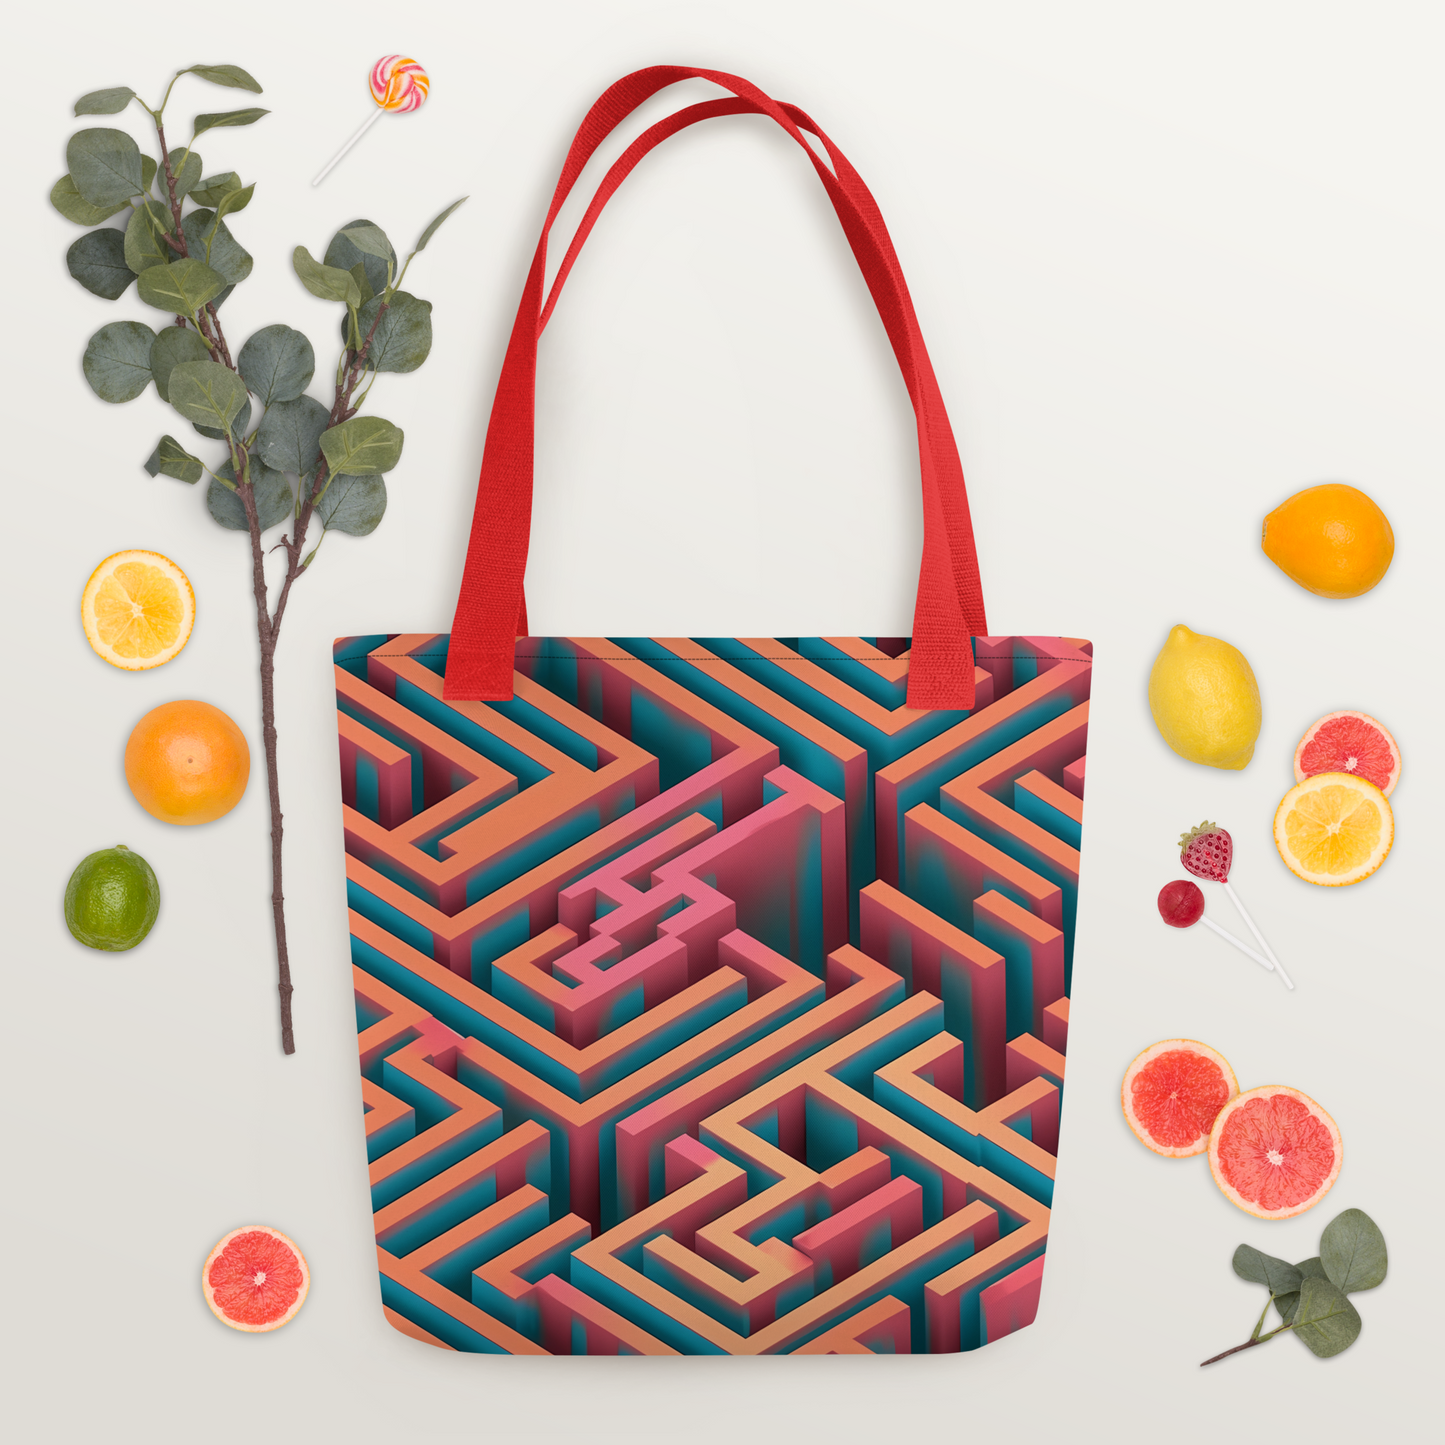 3D Maze Illusion | 3D Patterns | All-Over Print Tote - #1